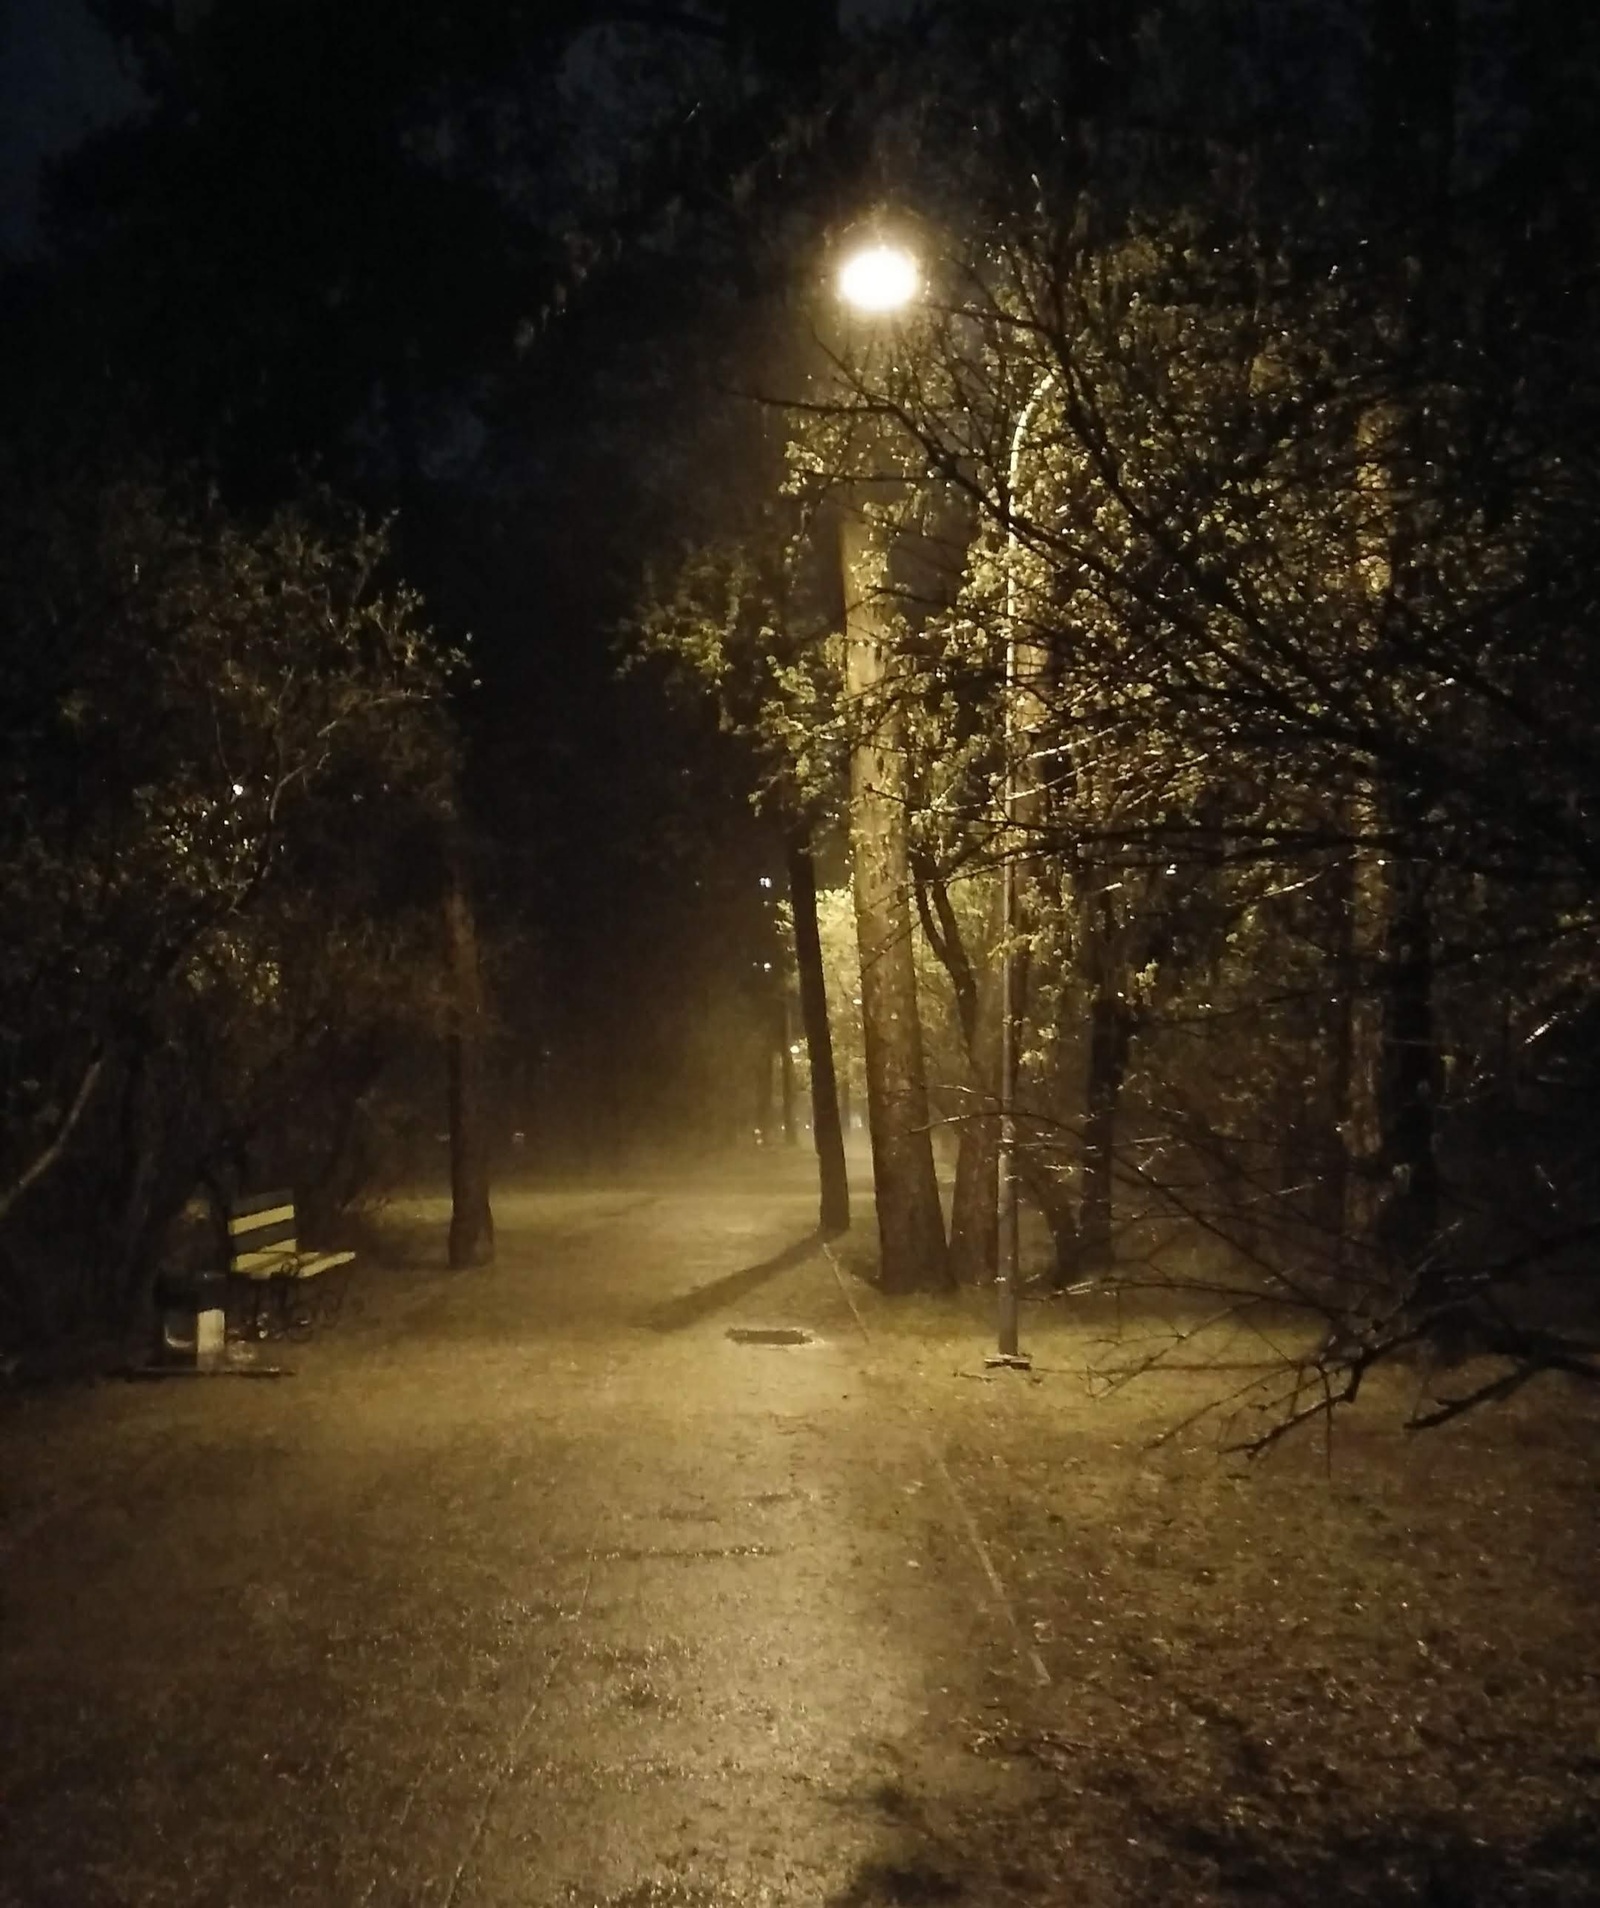 Horror weather - My, Mobile photography, Hail, Yekaterinburg, May 9, Fog, Horror, Longpost, Photo on sneaker, May 9 - Victory Day